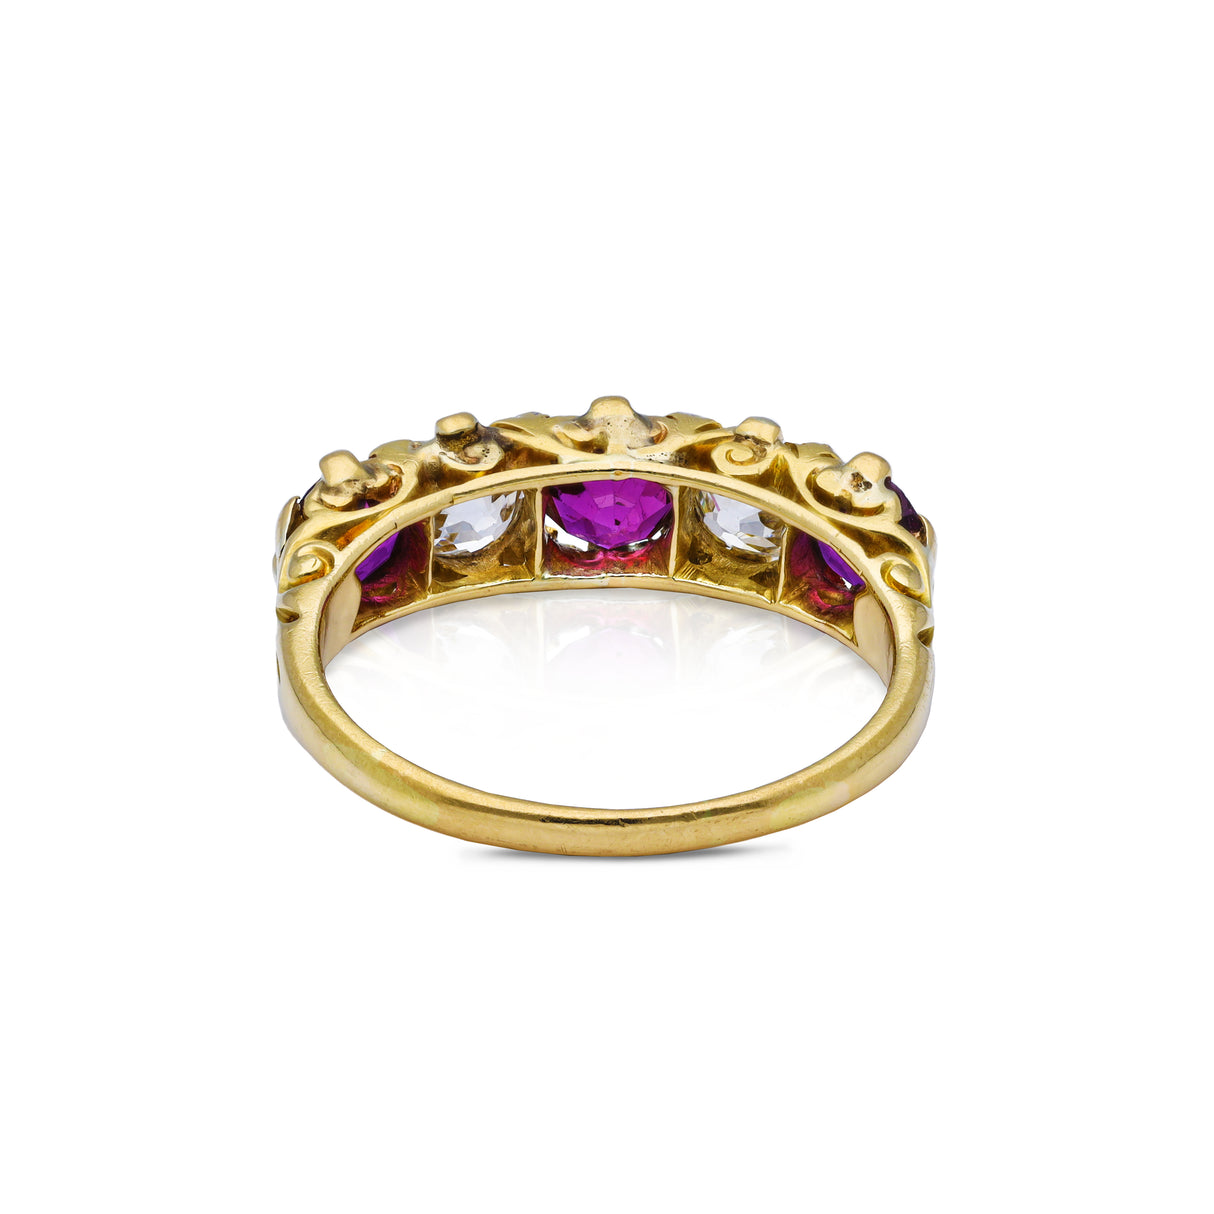 Antique, Edwardian five stone ruby and diamond ring, rear view. 